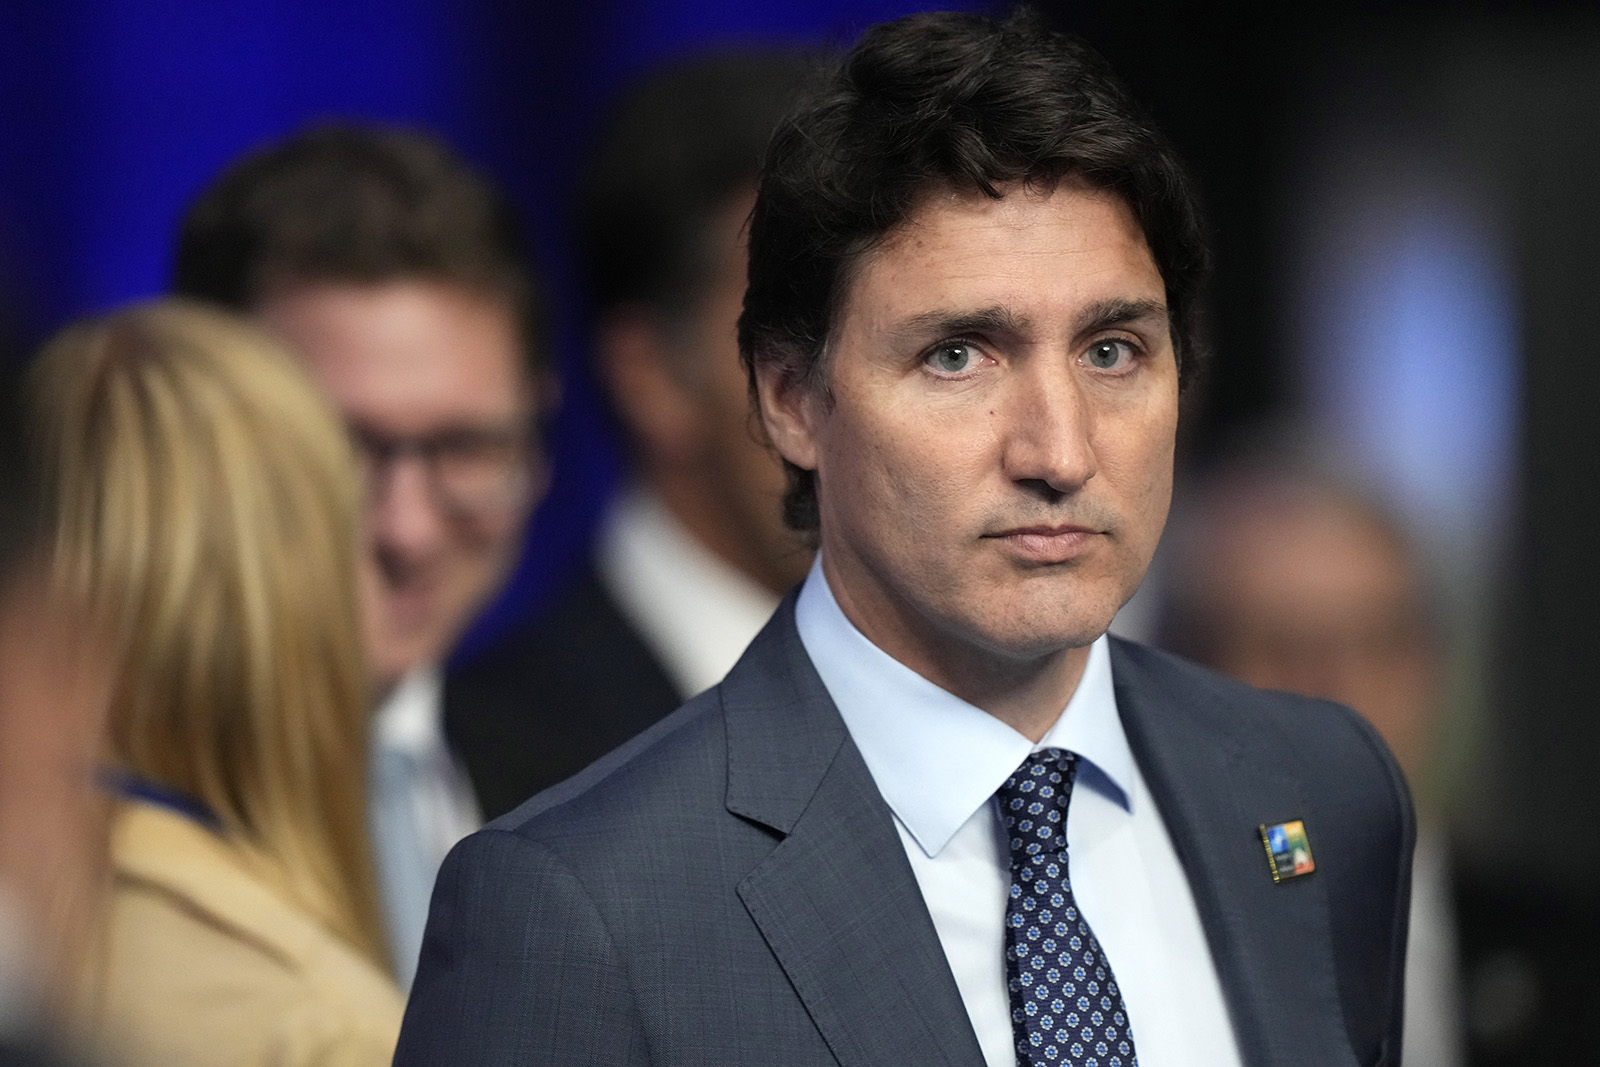 Canada's Prime Minister Justin Trudeau at a meeting of the North Atlantic Council with Partner Nations at a NATO summit in Vilnius, Lithuania, Wednesday, July 12, 2023. (AP Photo/Pavel Golovkin)